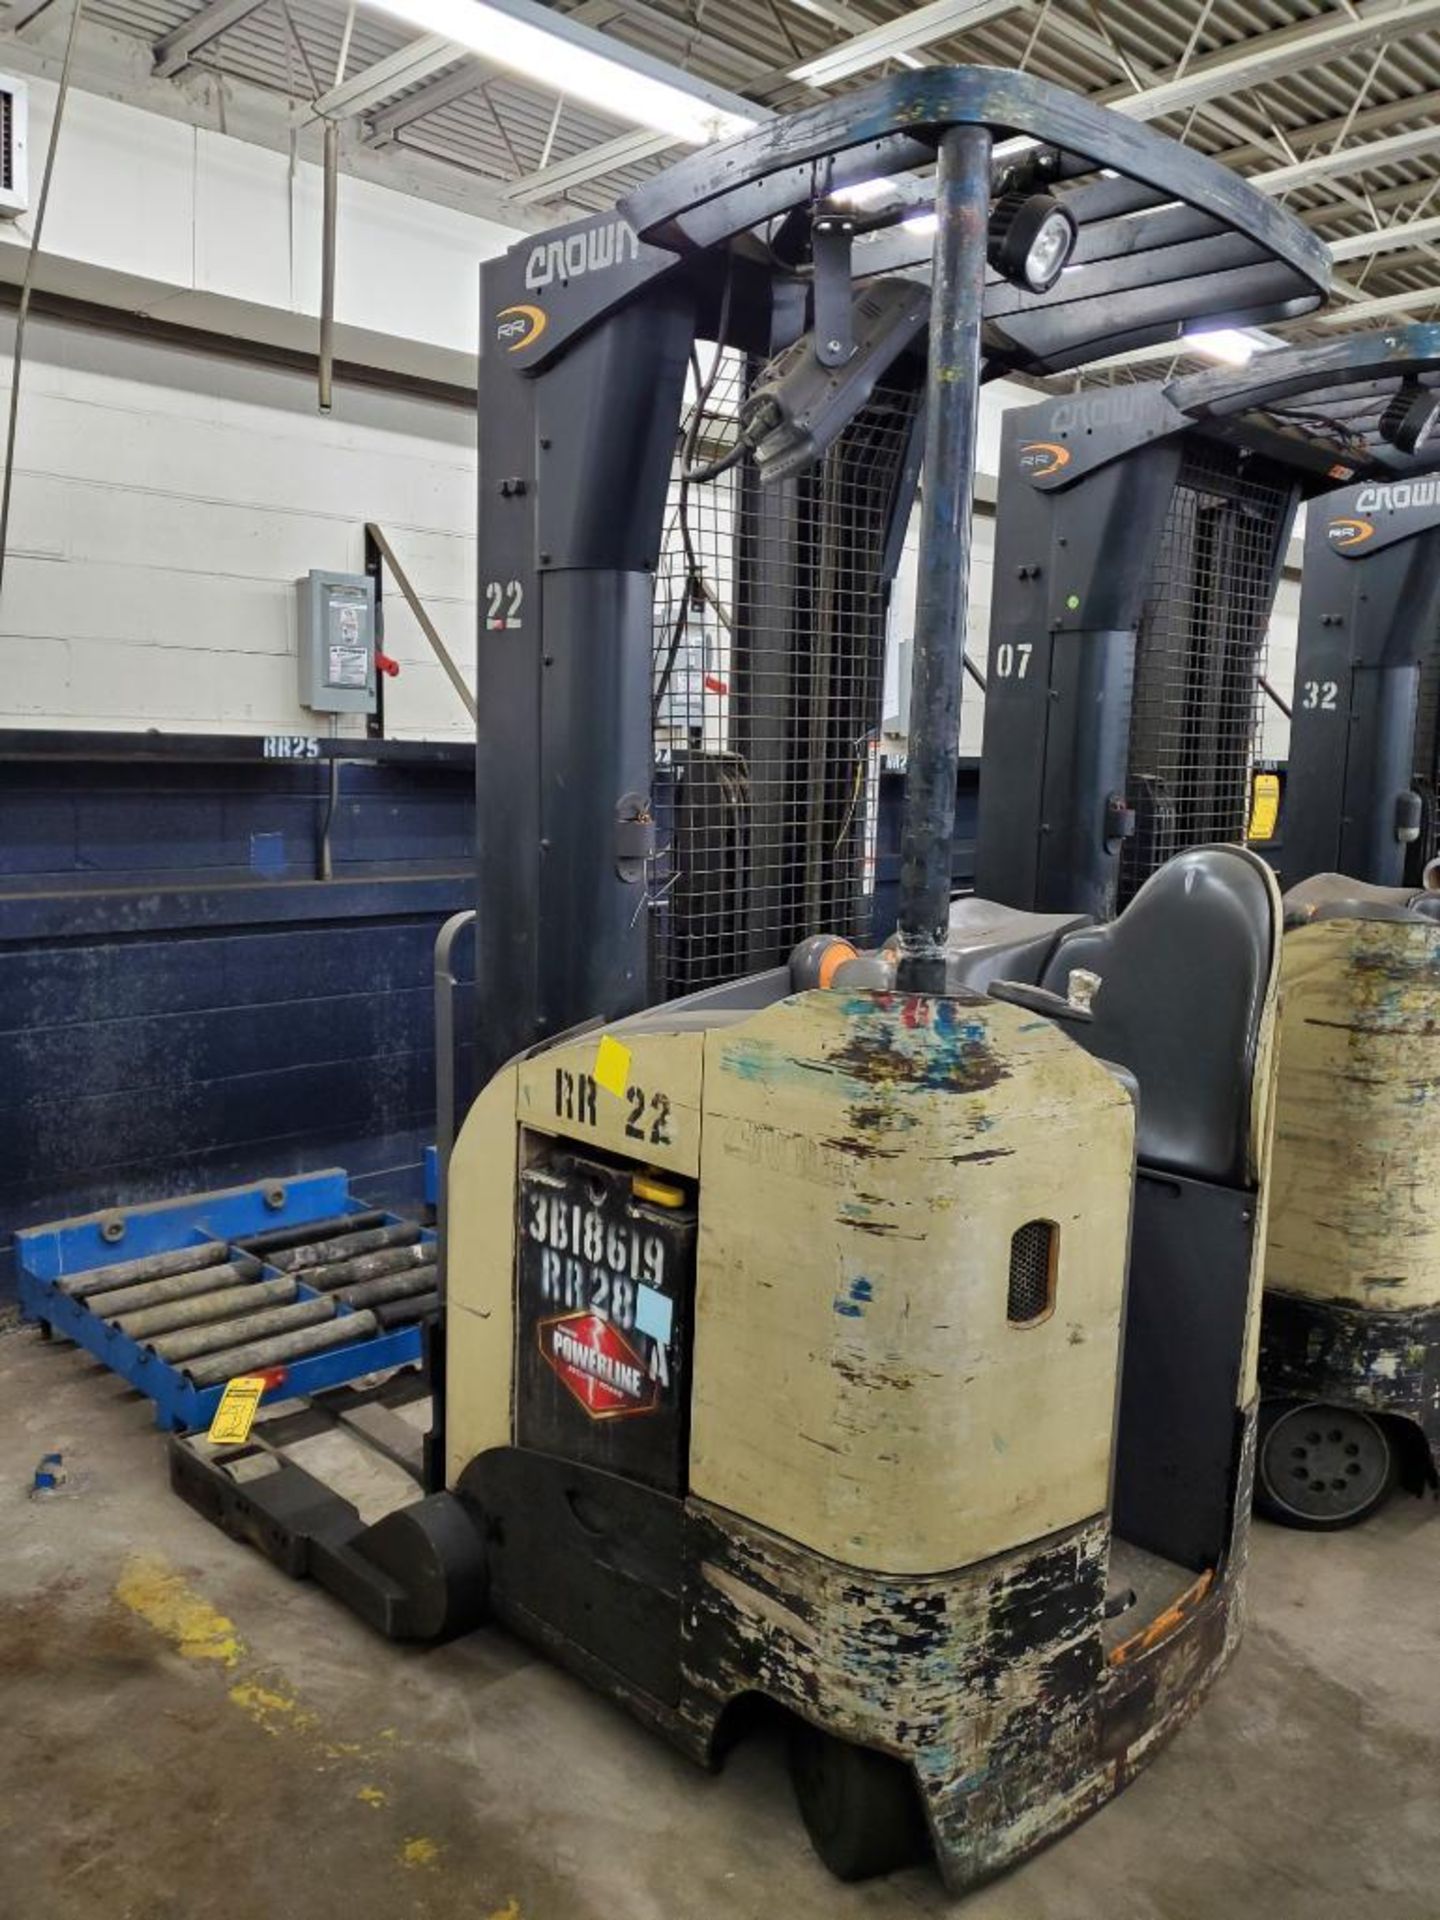 Crown RR 5200 Series Electric Reach Truck, Model RR5220-45, S/N. 1A322087, 4,500 LB. Lift Capacity, - Image 2 of 10